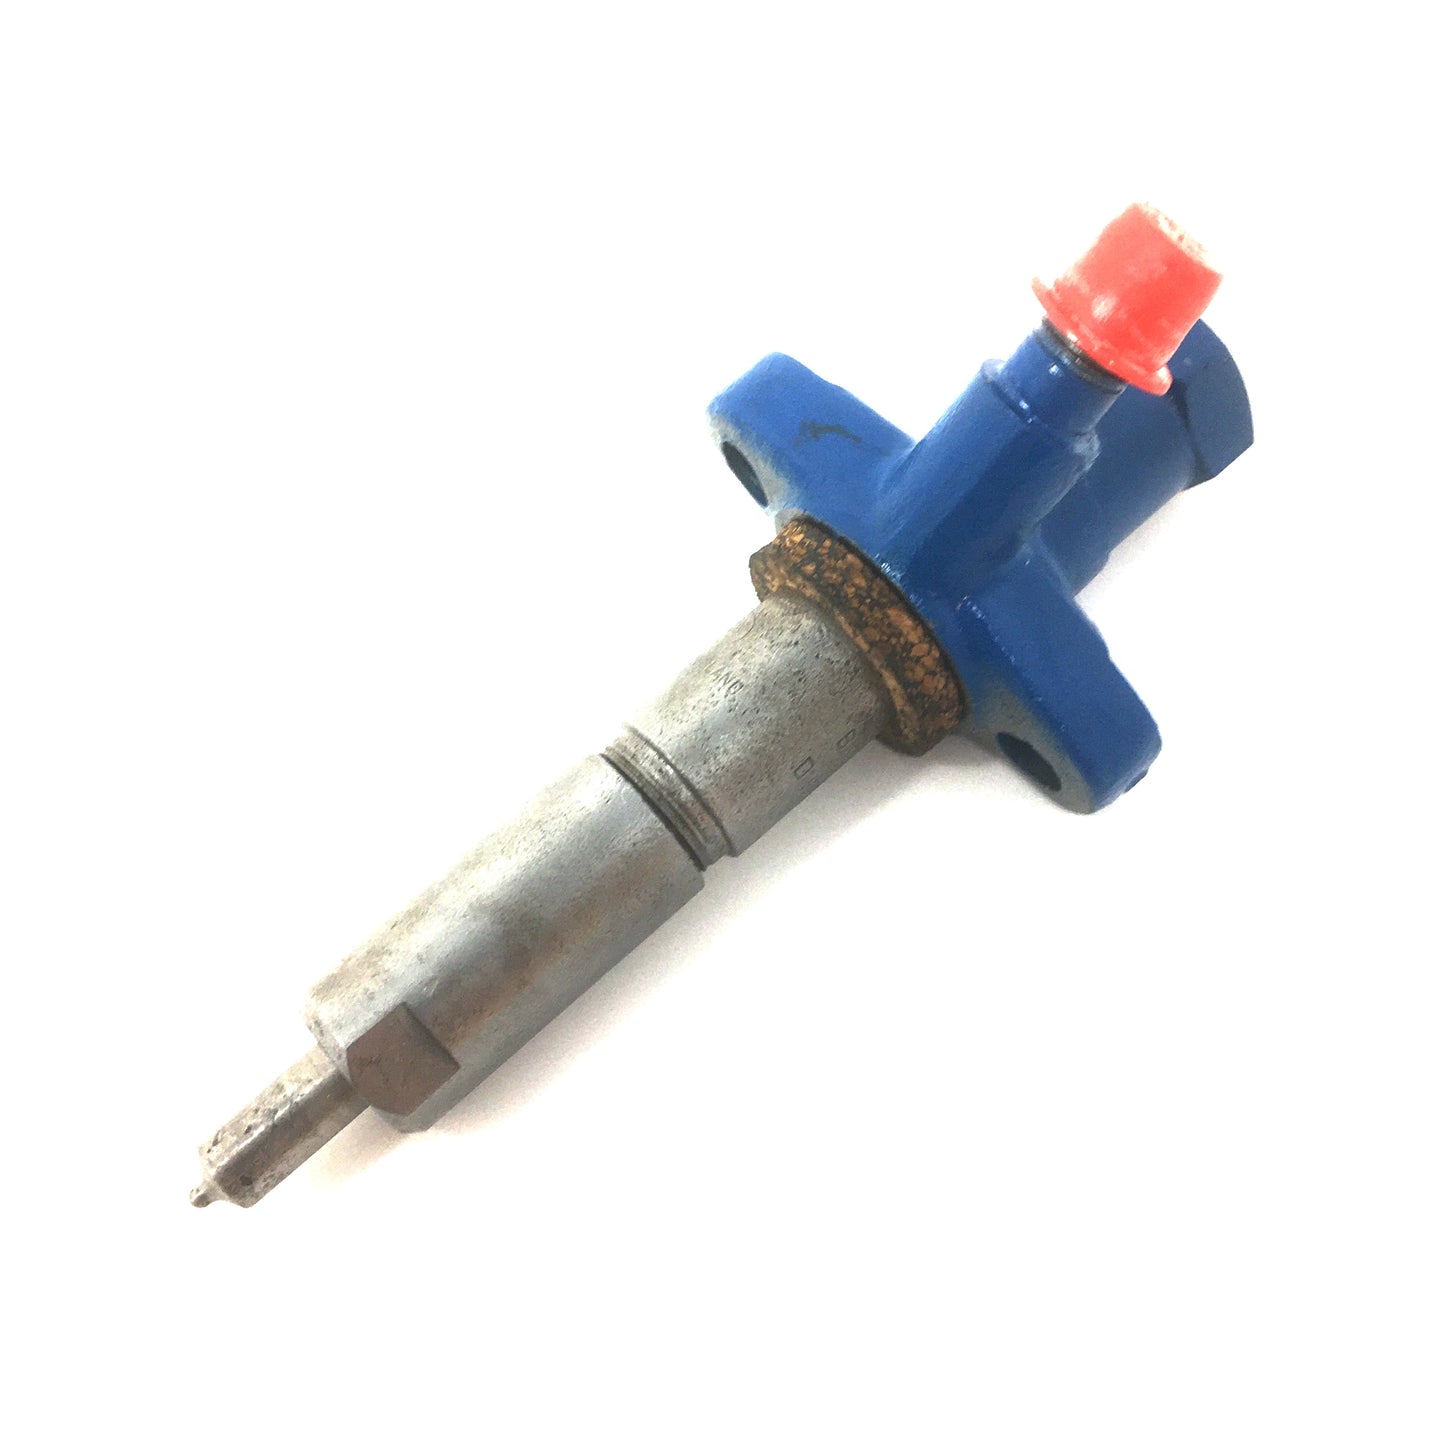 Injector for Ford Tractor (5222305)